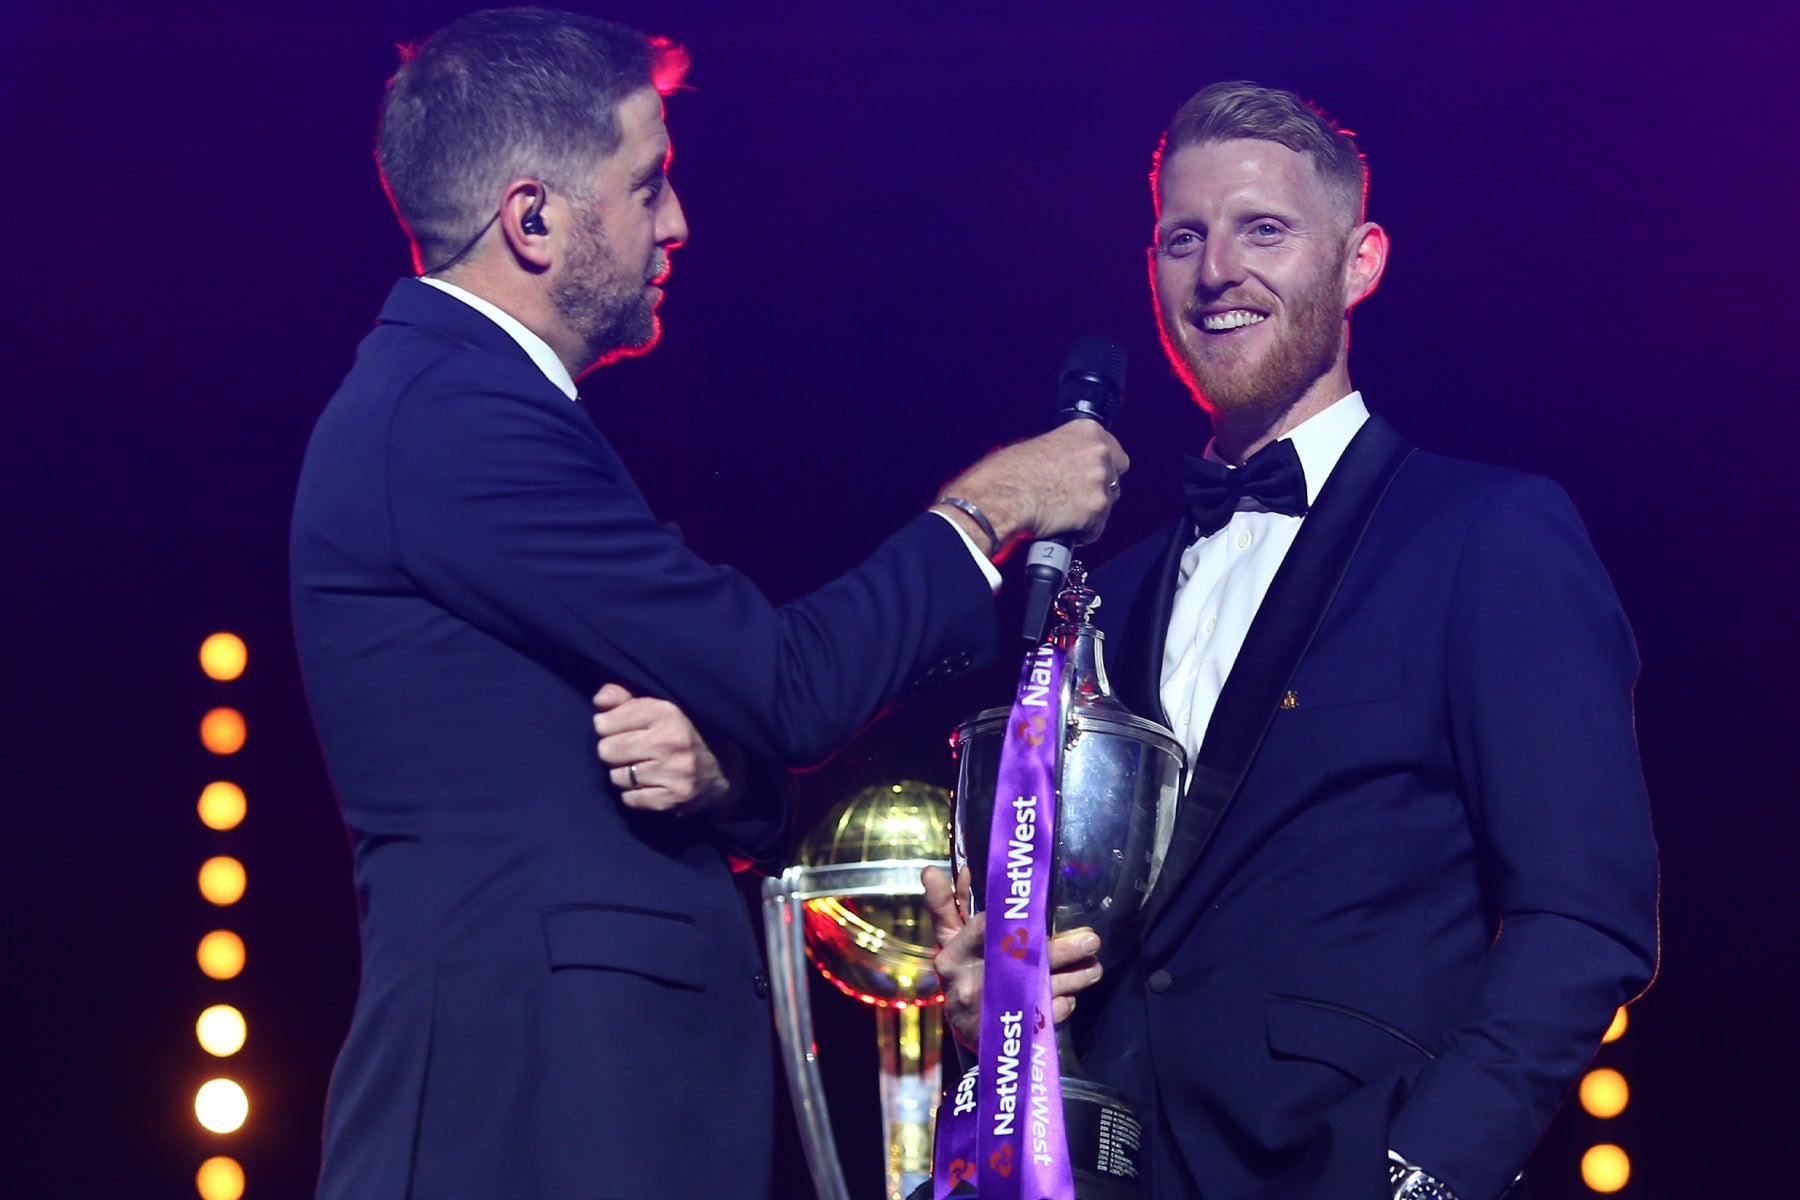 Stokes is 2019 BBC Sports Personality of the Year